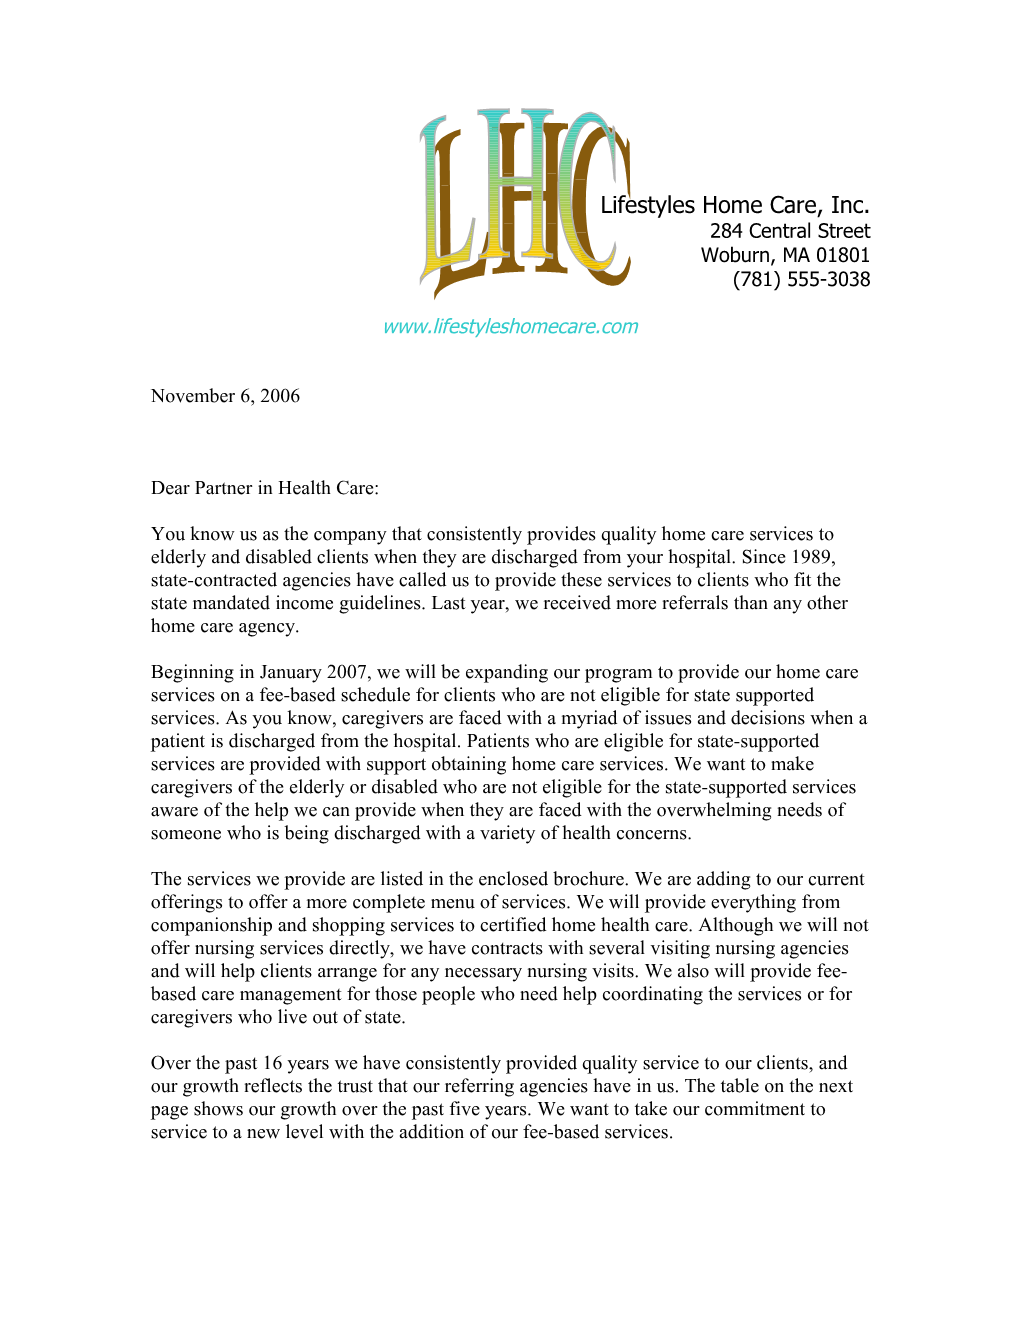 Lifestyles Home Care Hospital Letter